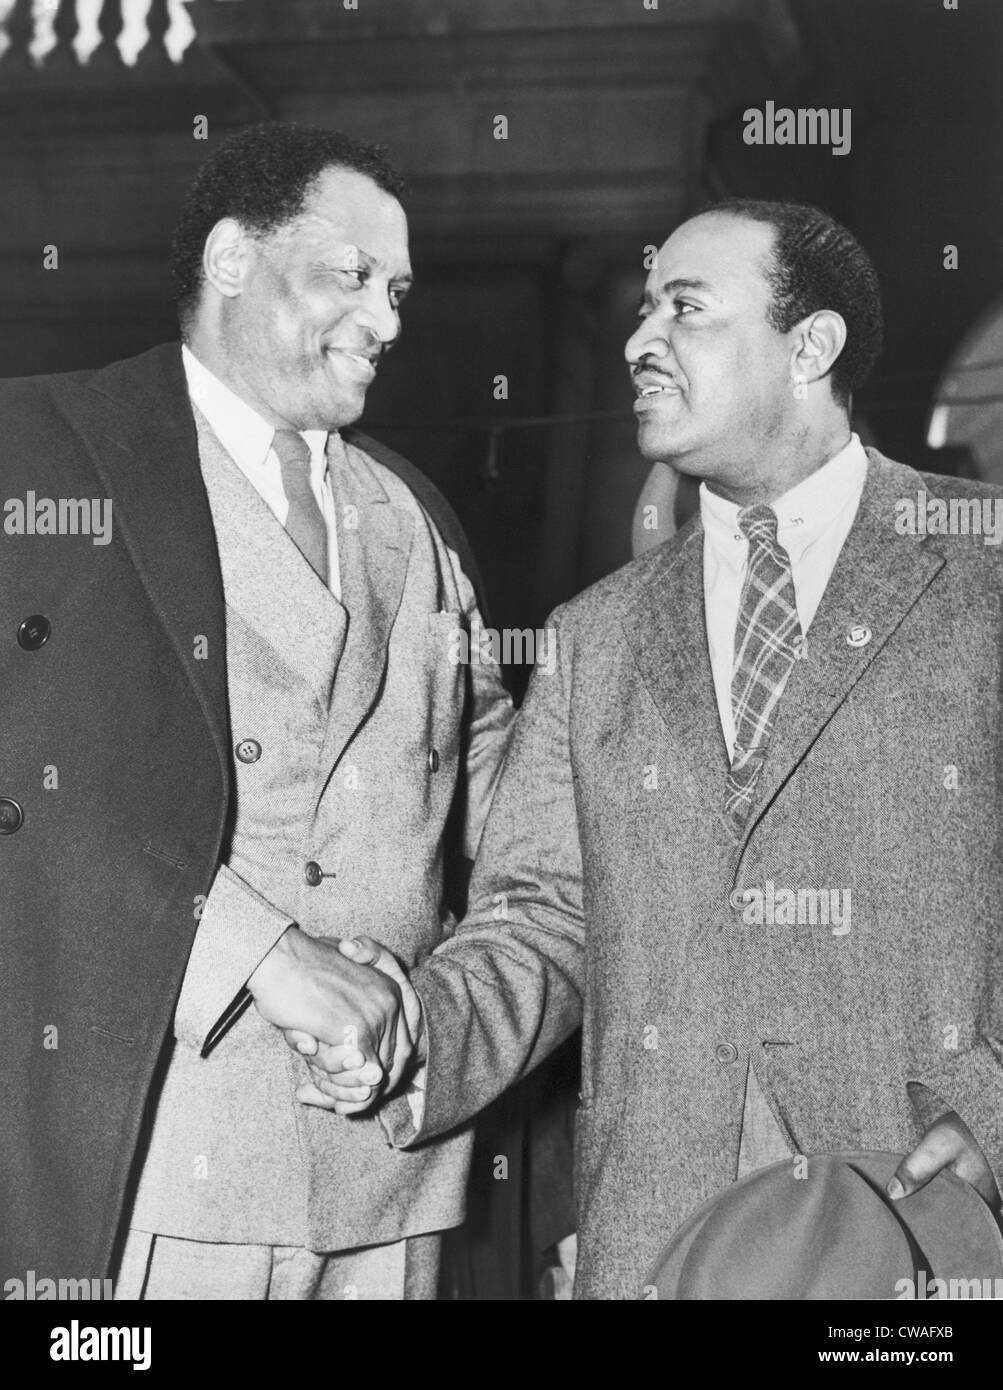 Paul Robeson (1898-1976), shaking hands with New York City Councilman Ben  Davis (1903-1964), in Union Square during May Day Stock Photo - Alamy